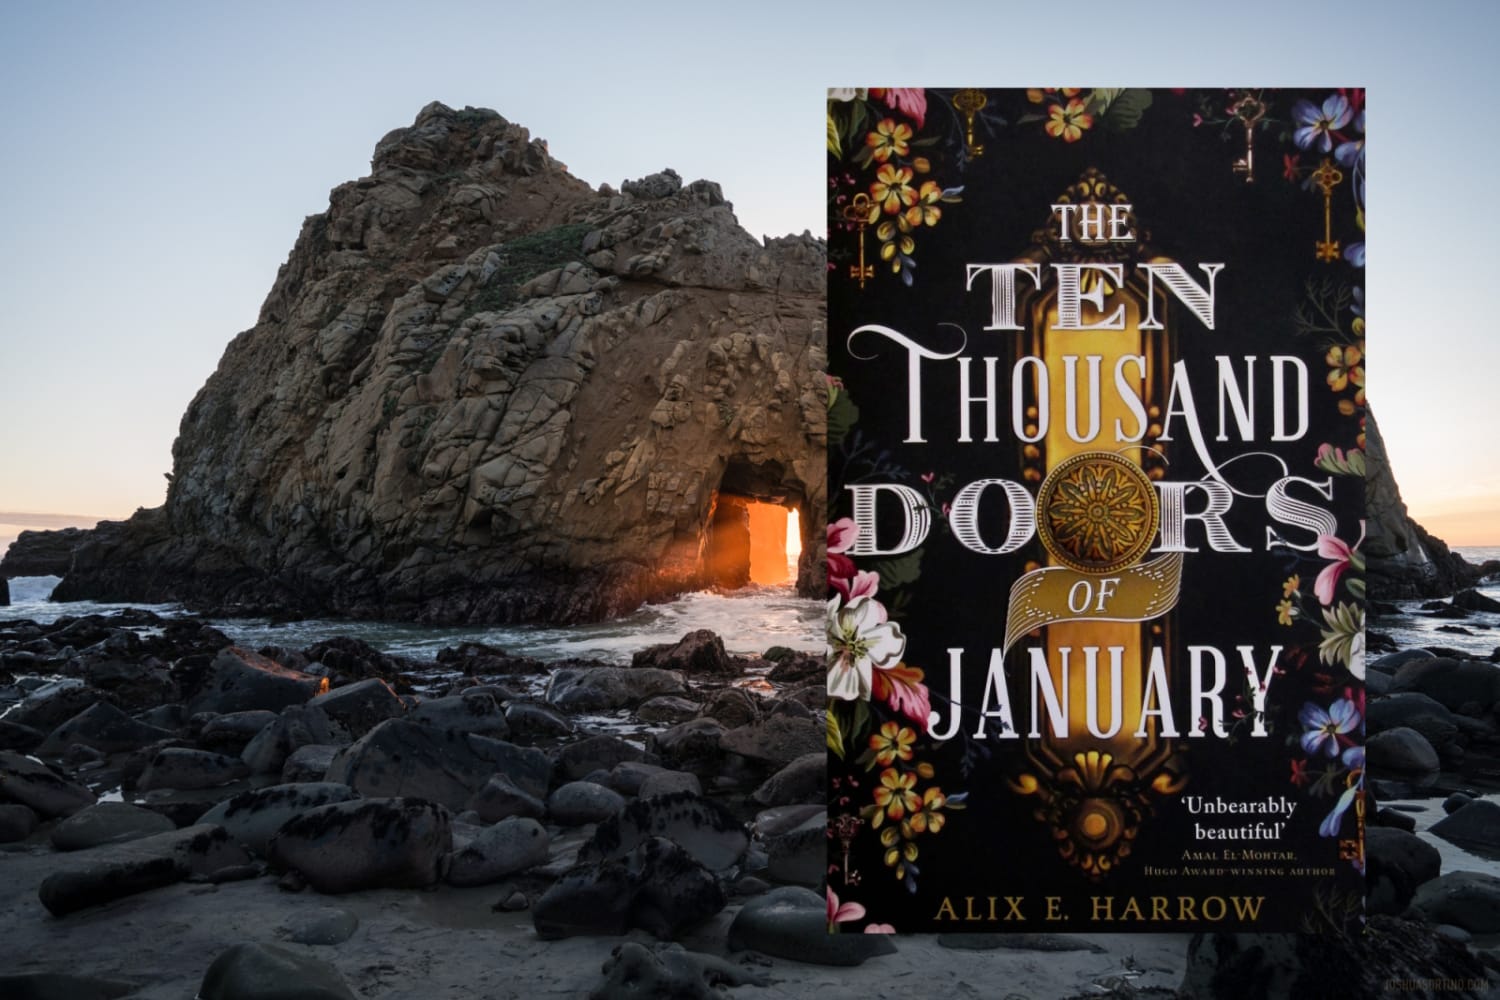 Book cover: gold door handle surrounded in flowers. Background image is a rock in the sea with a glowing door